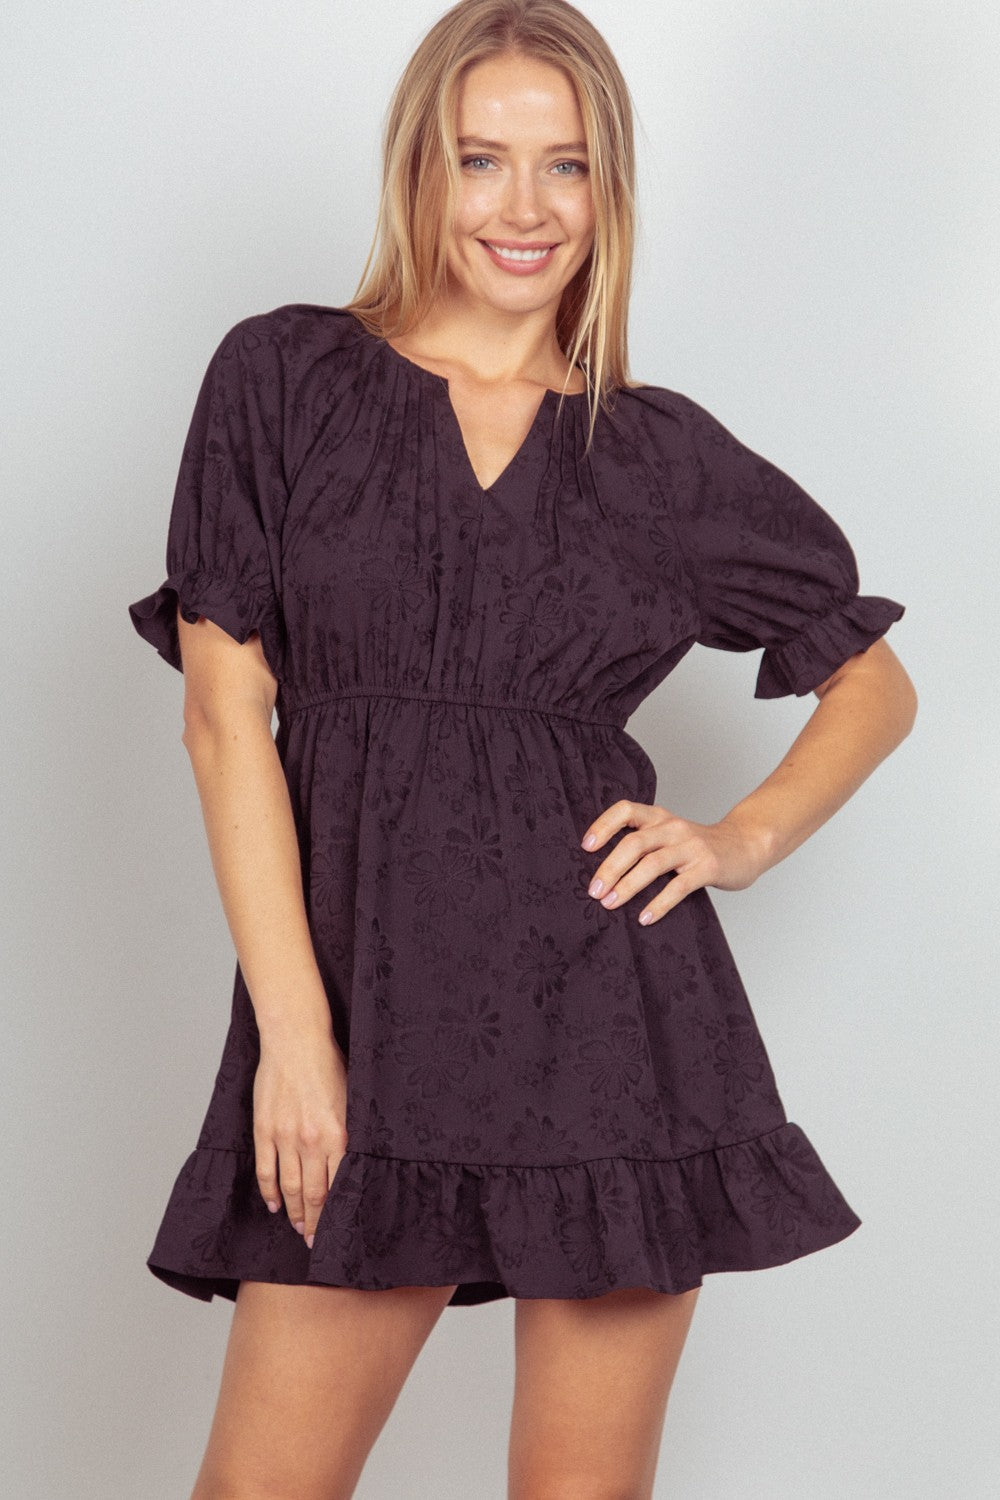 This Floral Textured Woven Ruffled Mini Dress is a charming and feminine choice for any special occasion. The floral textured fabric adds a romantic touch to the sweet ruffled details.  S  - L